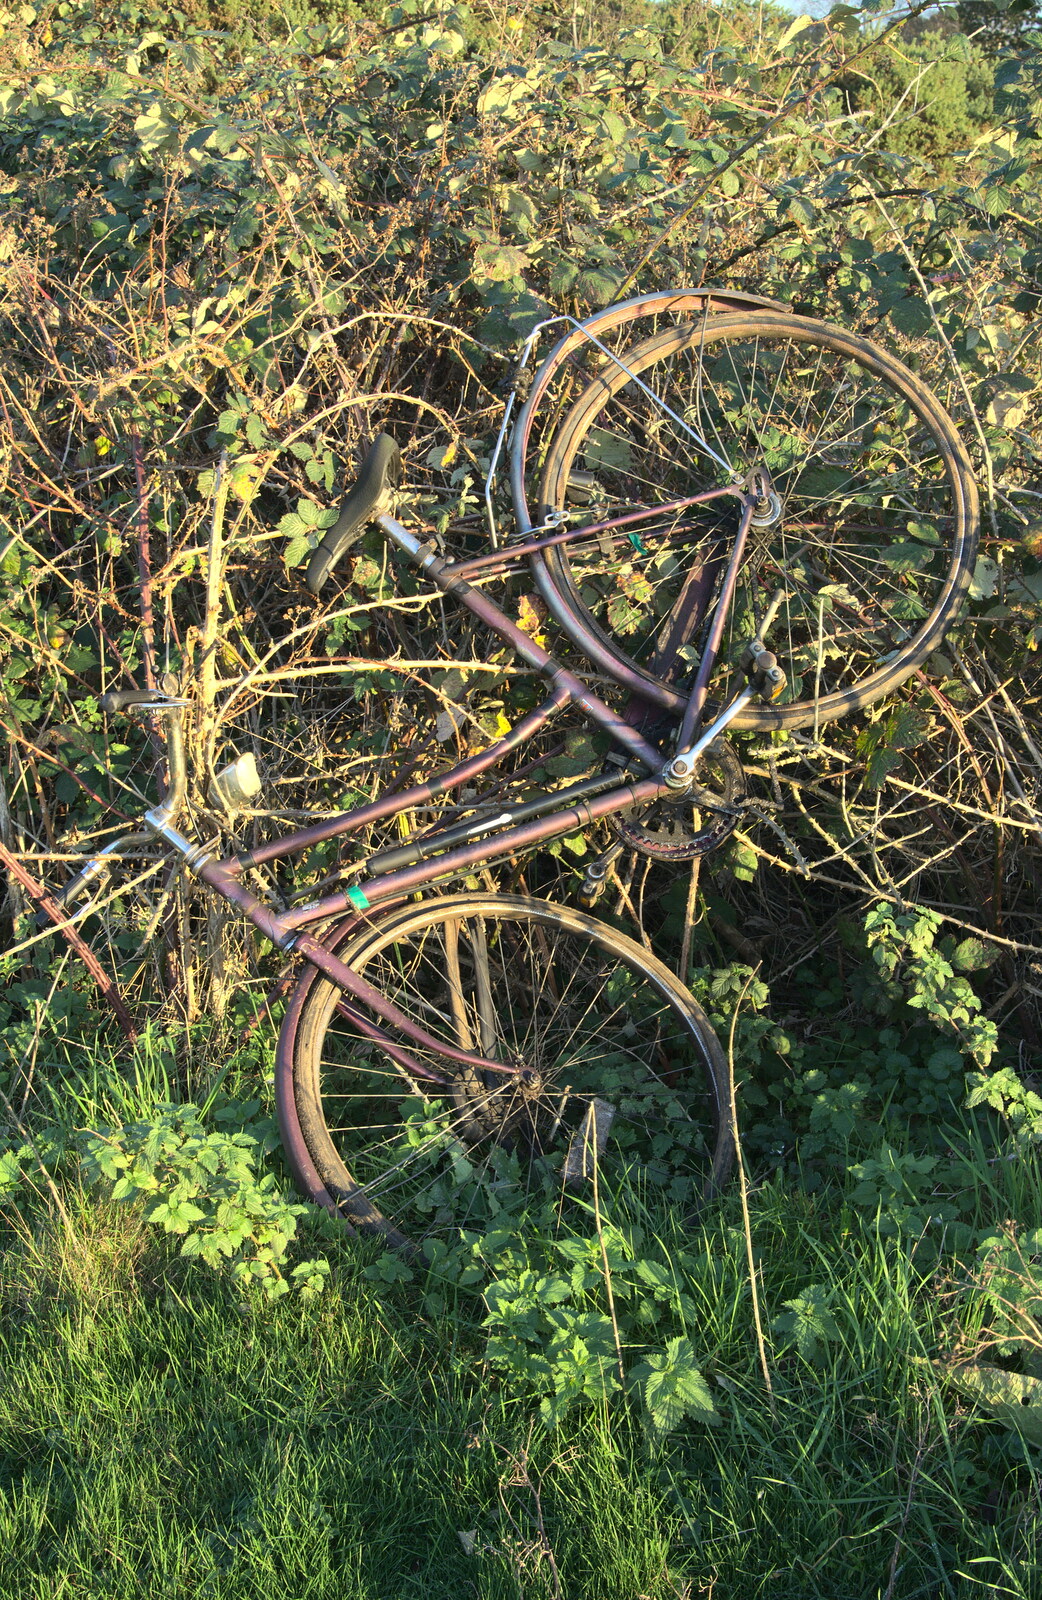 There's a discarded bicycle in a hedge from A Halloween Party at the Village Hall, Brome, Suffolk - 31st October 2014